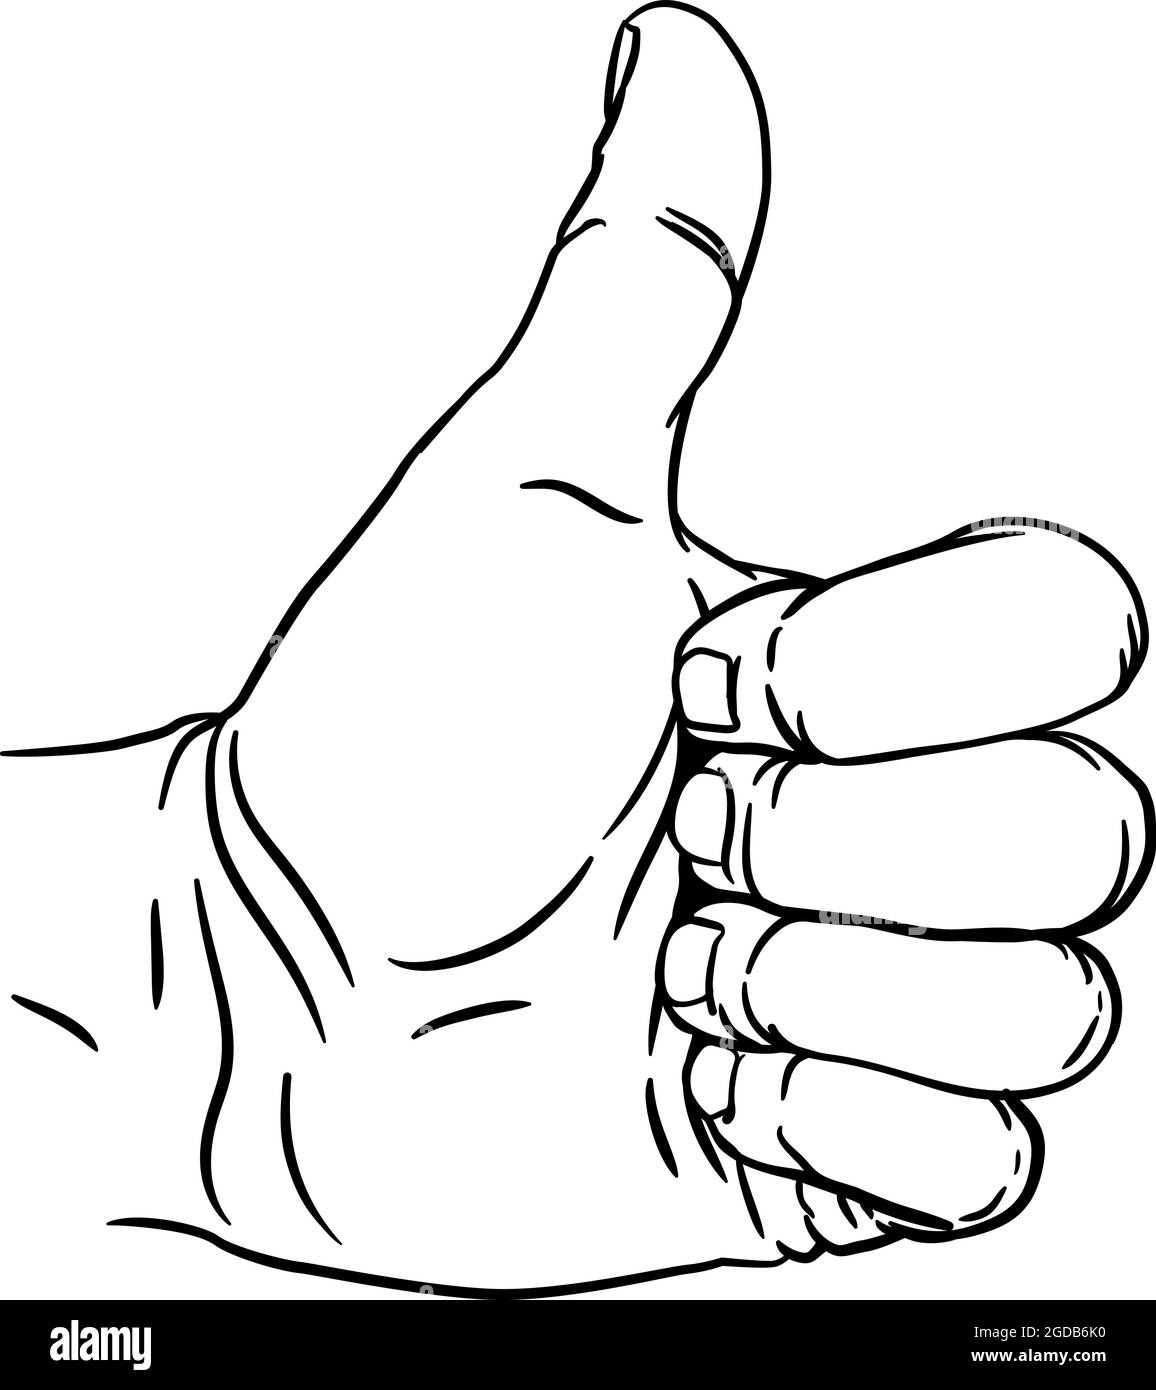 Hand Thumbs Up Gesture Thumb Out Fingers In Fist Stock Vector